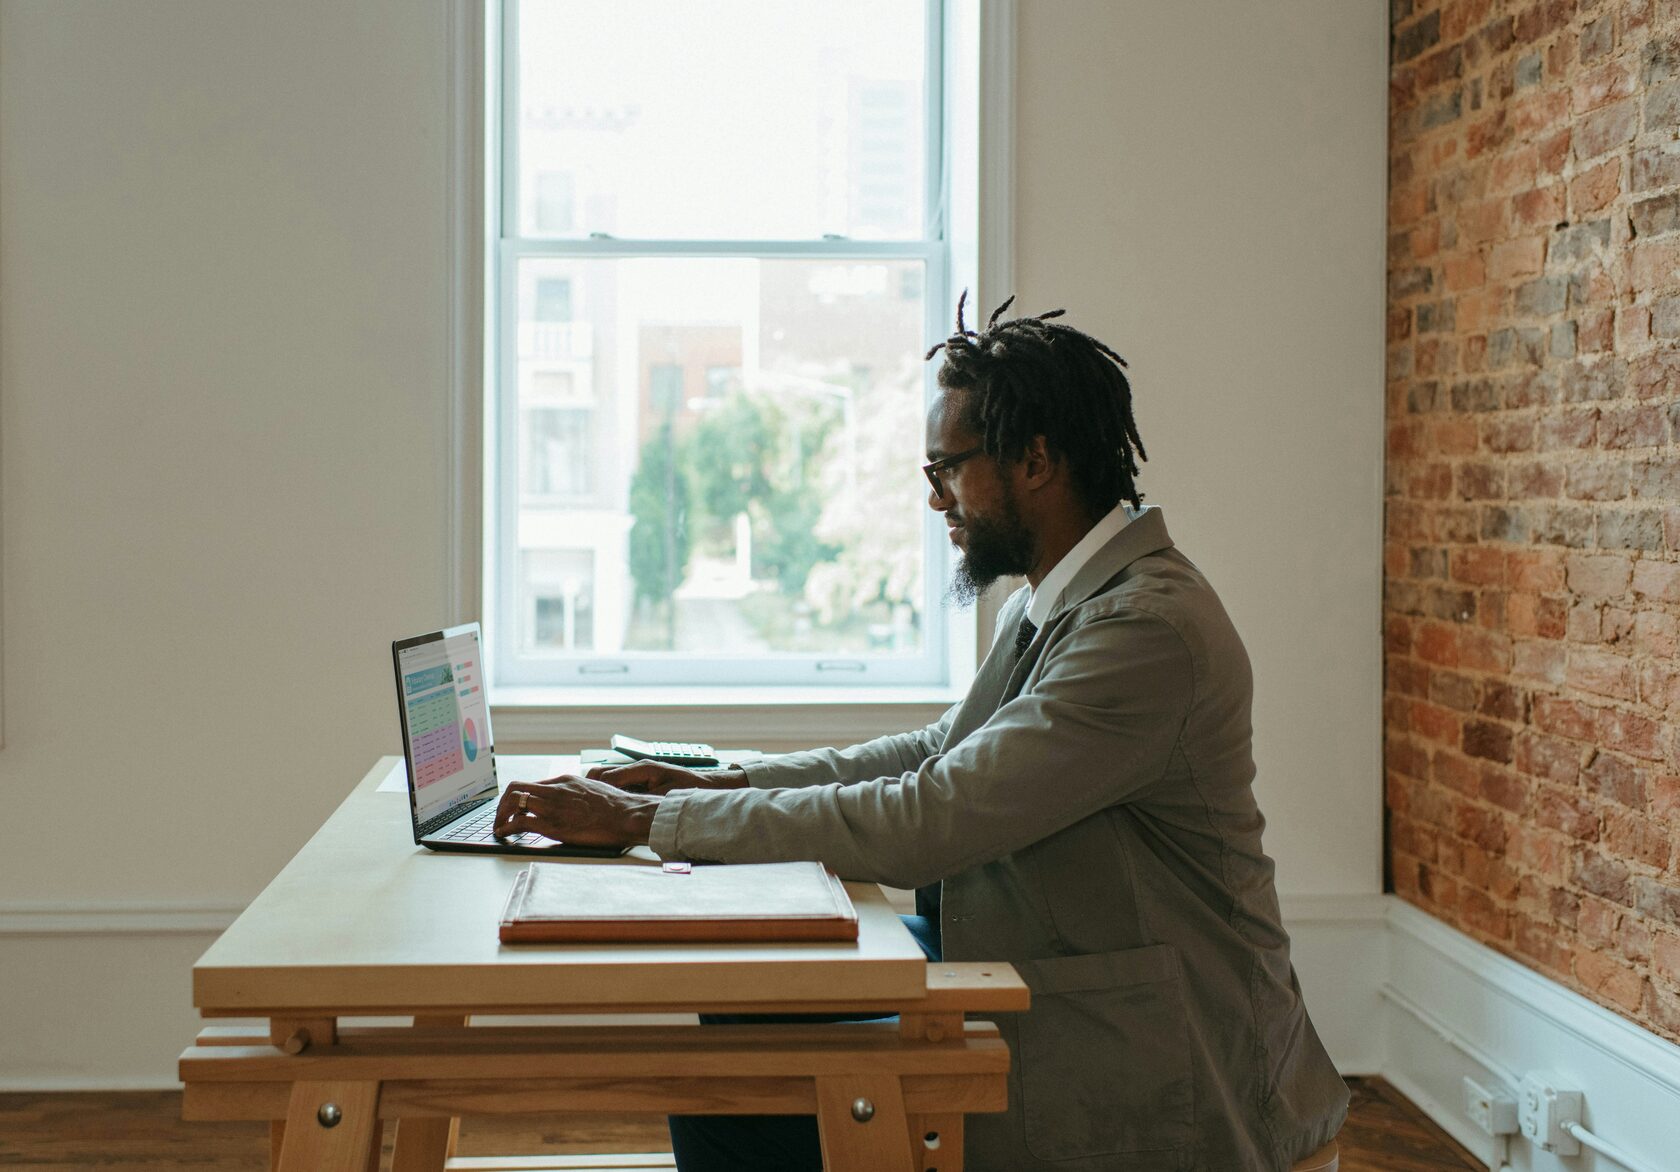 A man sitting at a desk, focused on his laptop, working diligently.